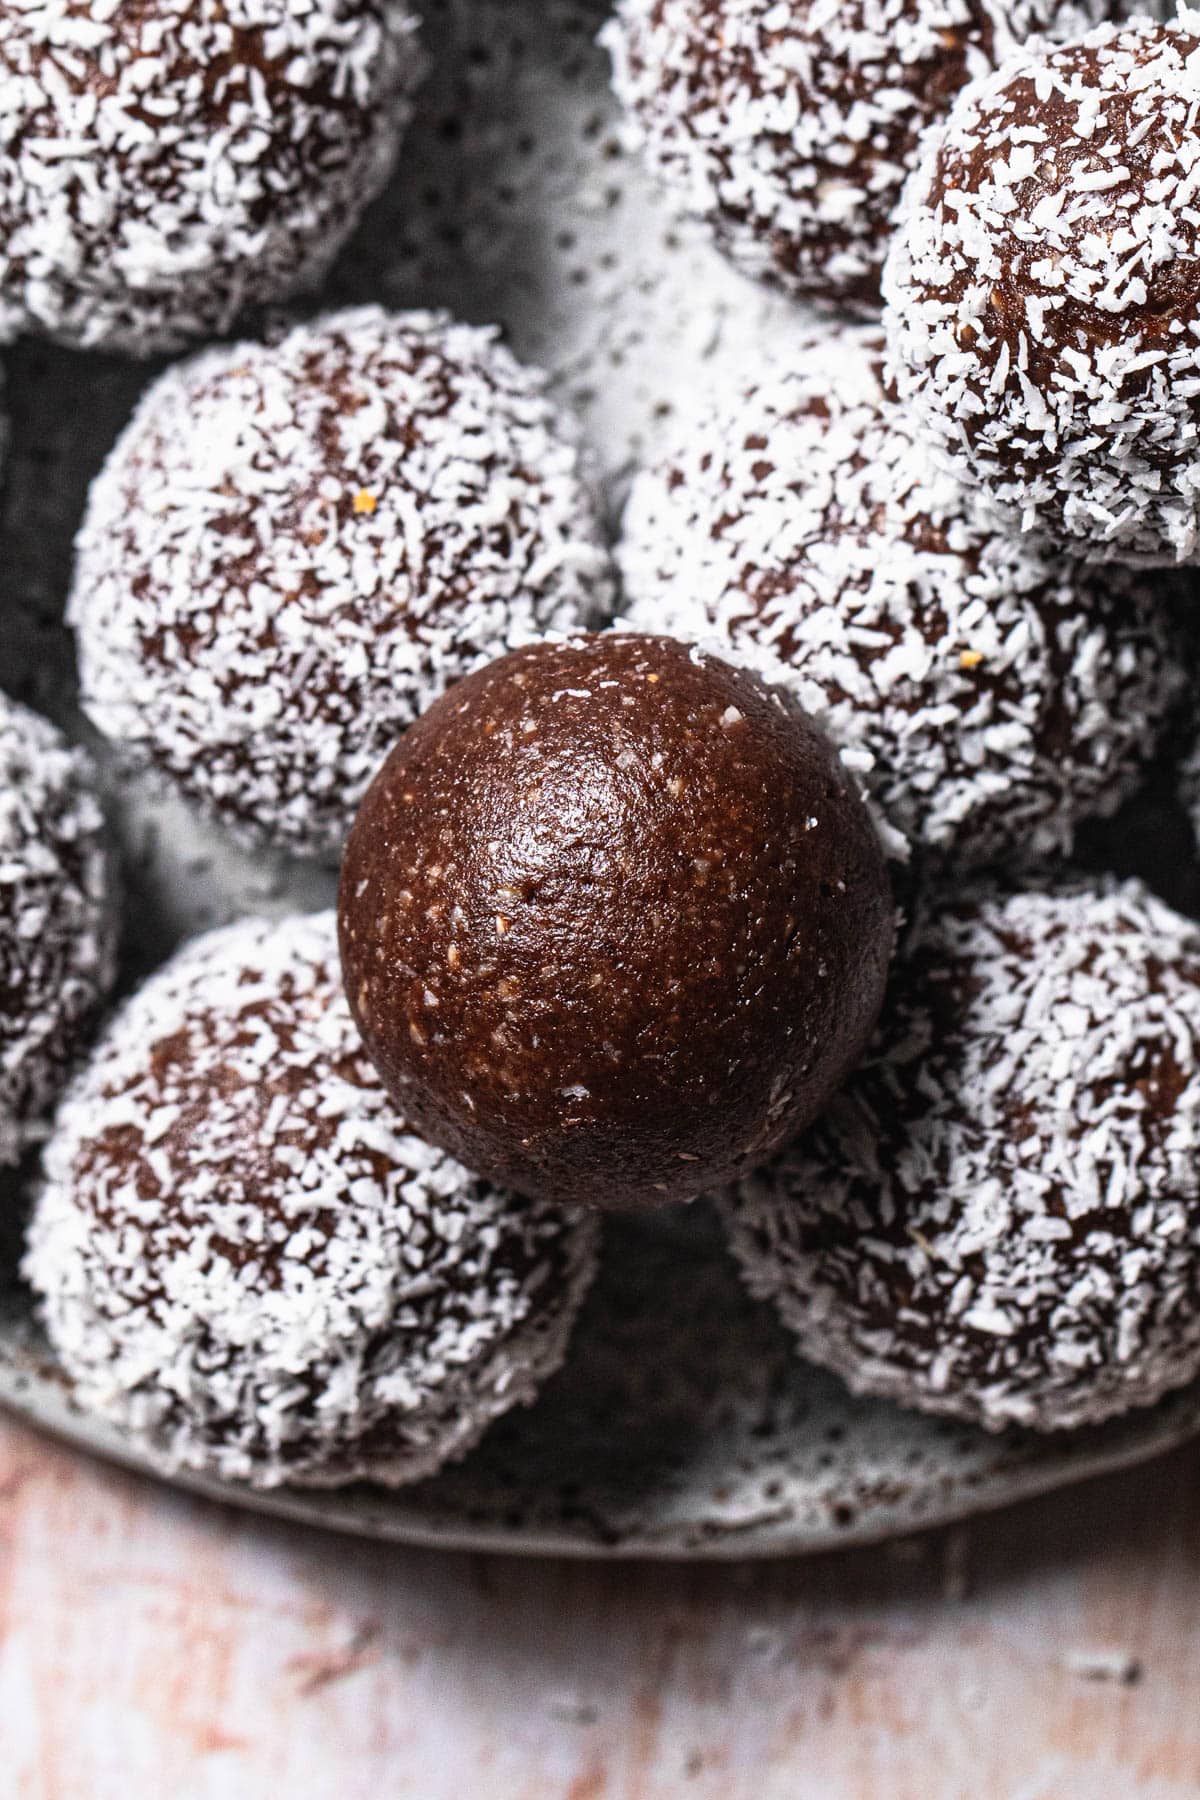 Nut free chocolate bliss balls on a plate.